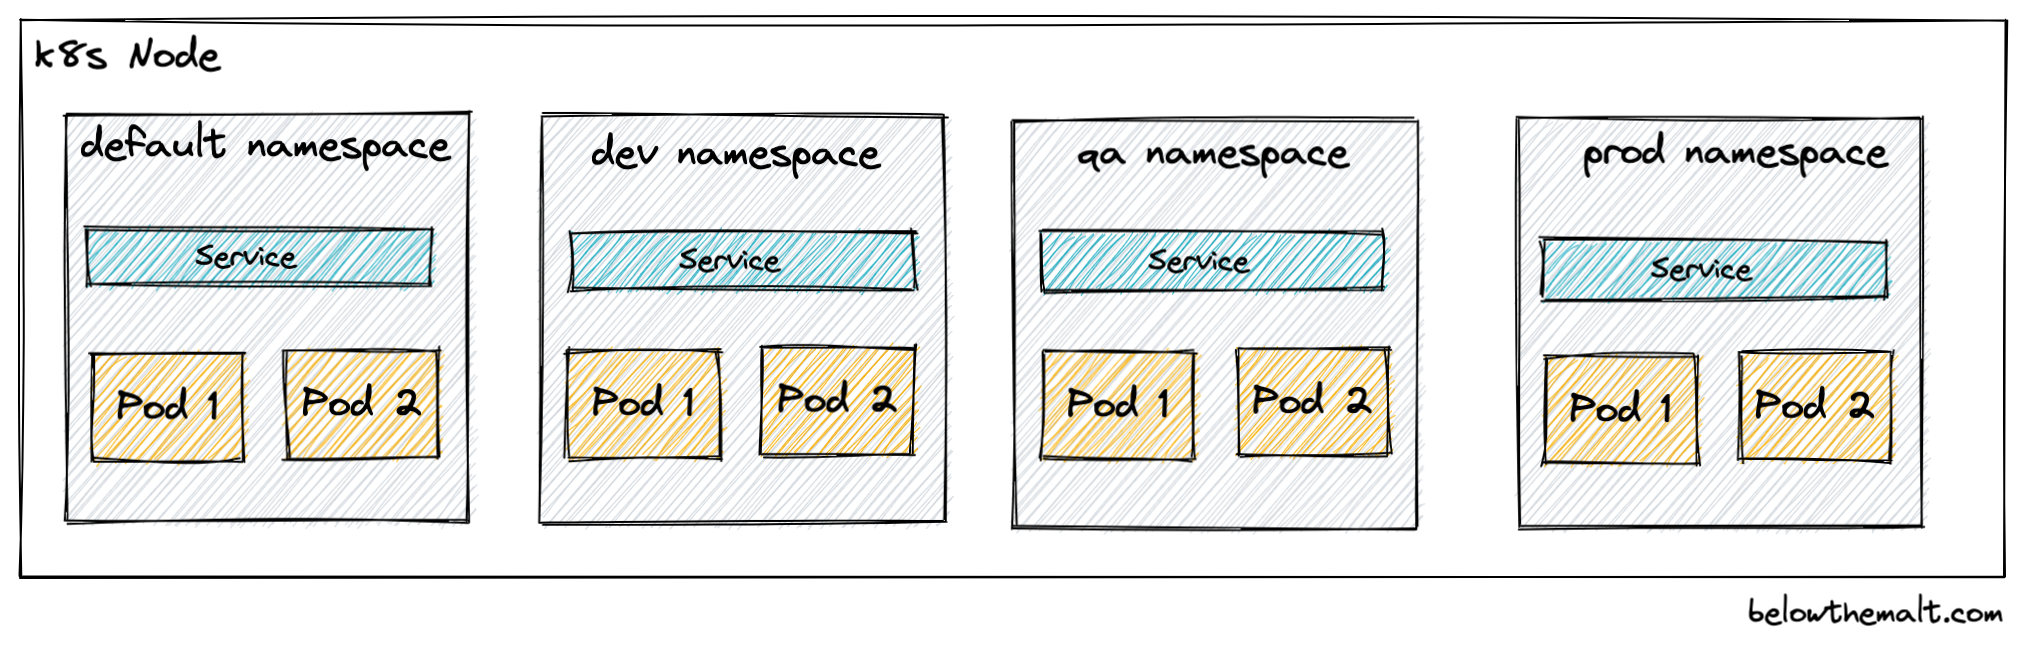 kubernetes-namespaces-kubens-blogs-ideas-train-of-thoughts